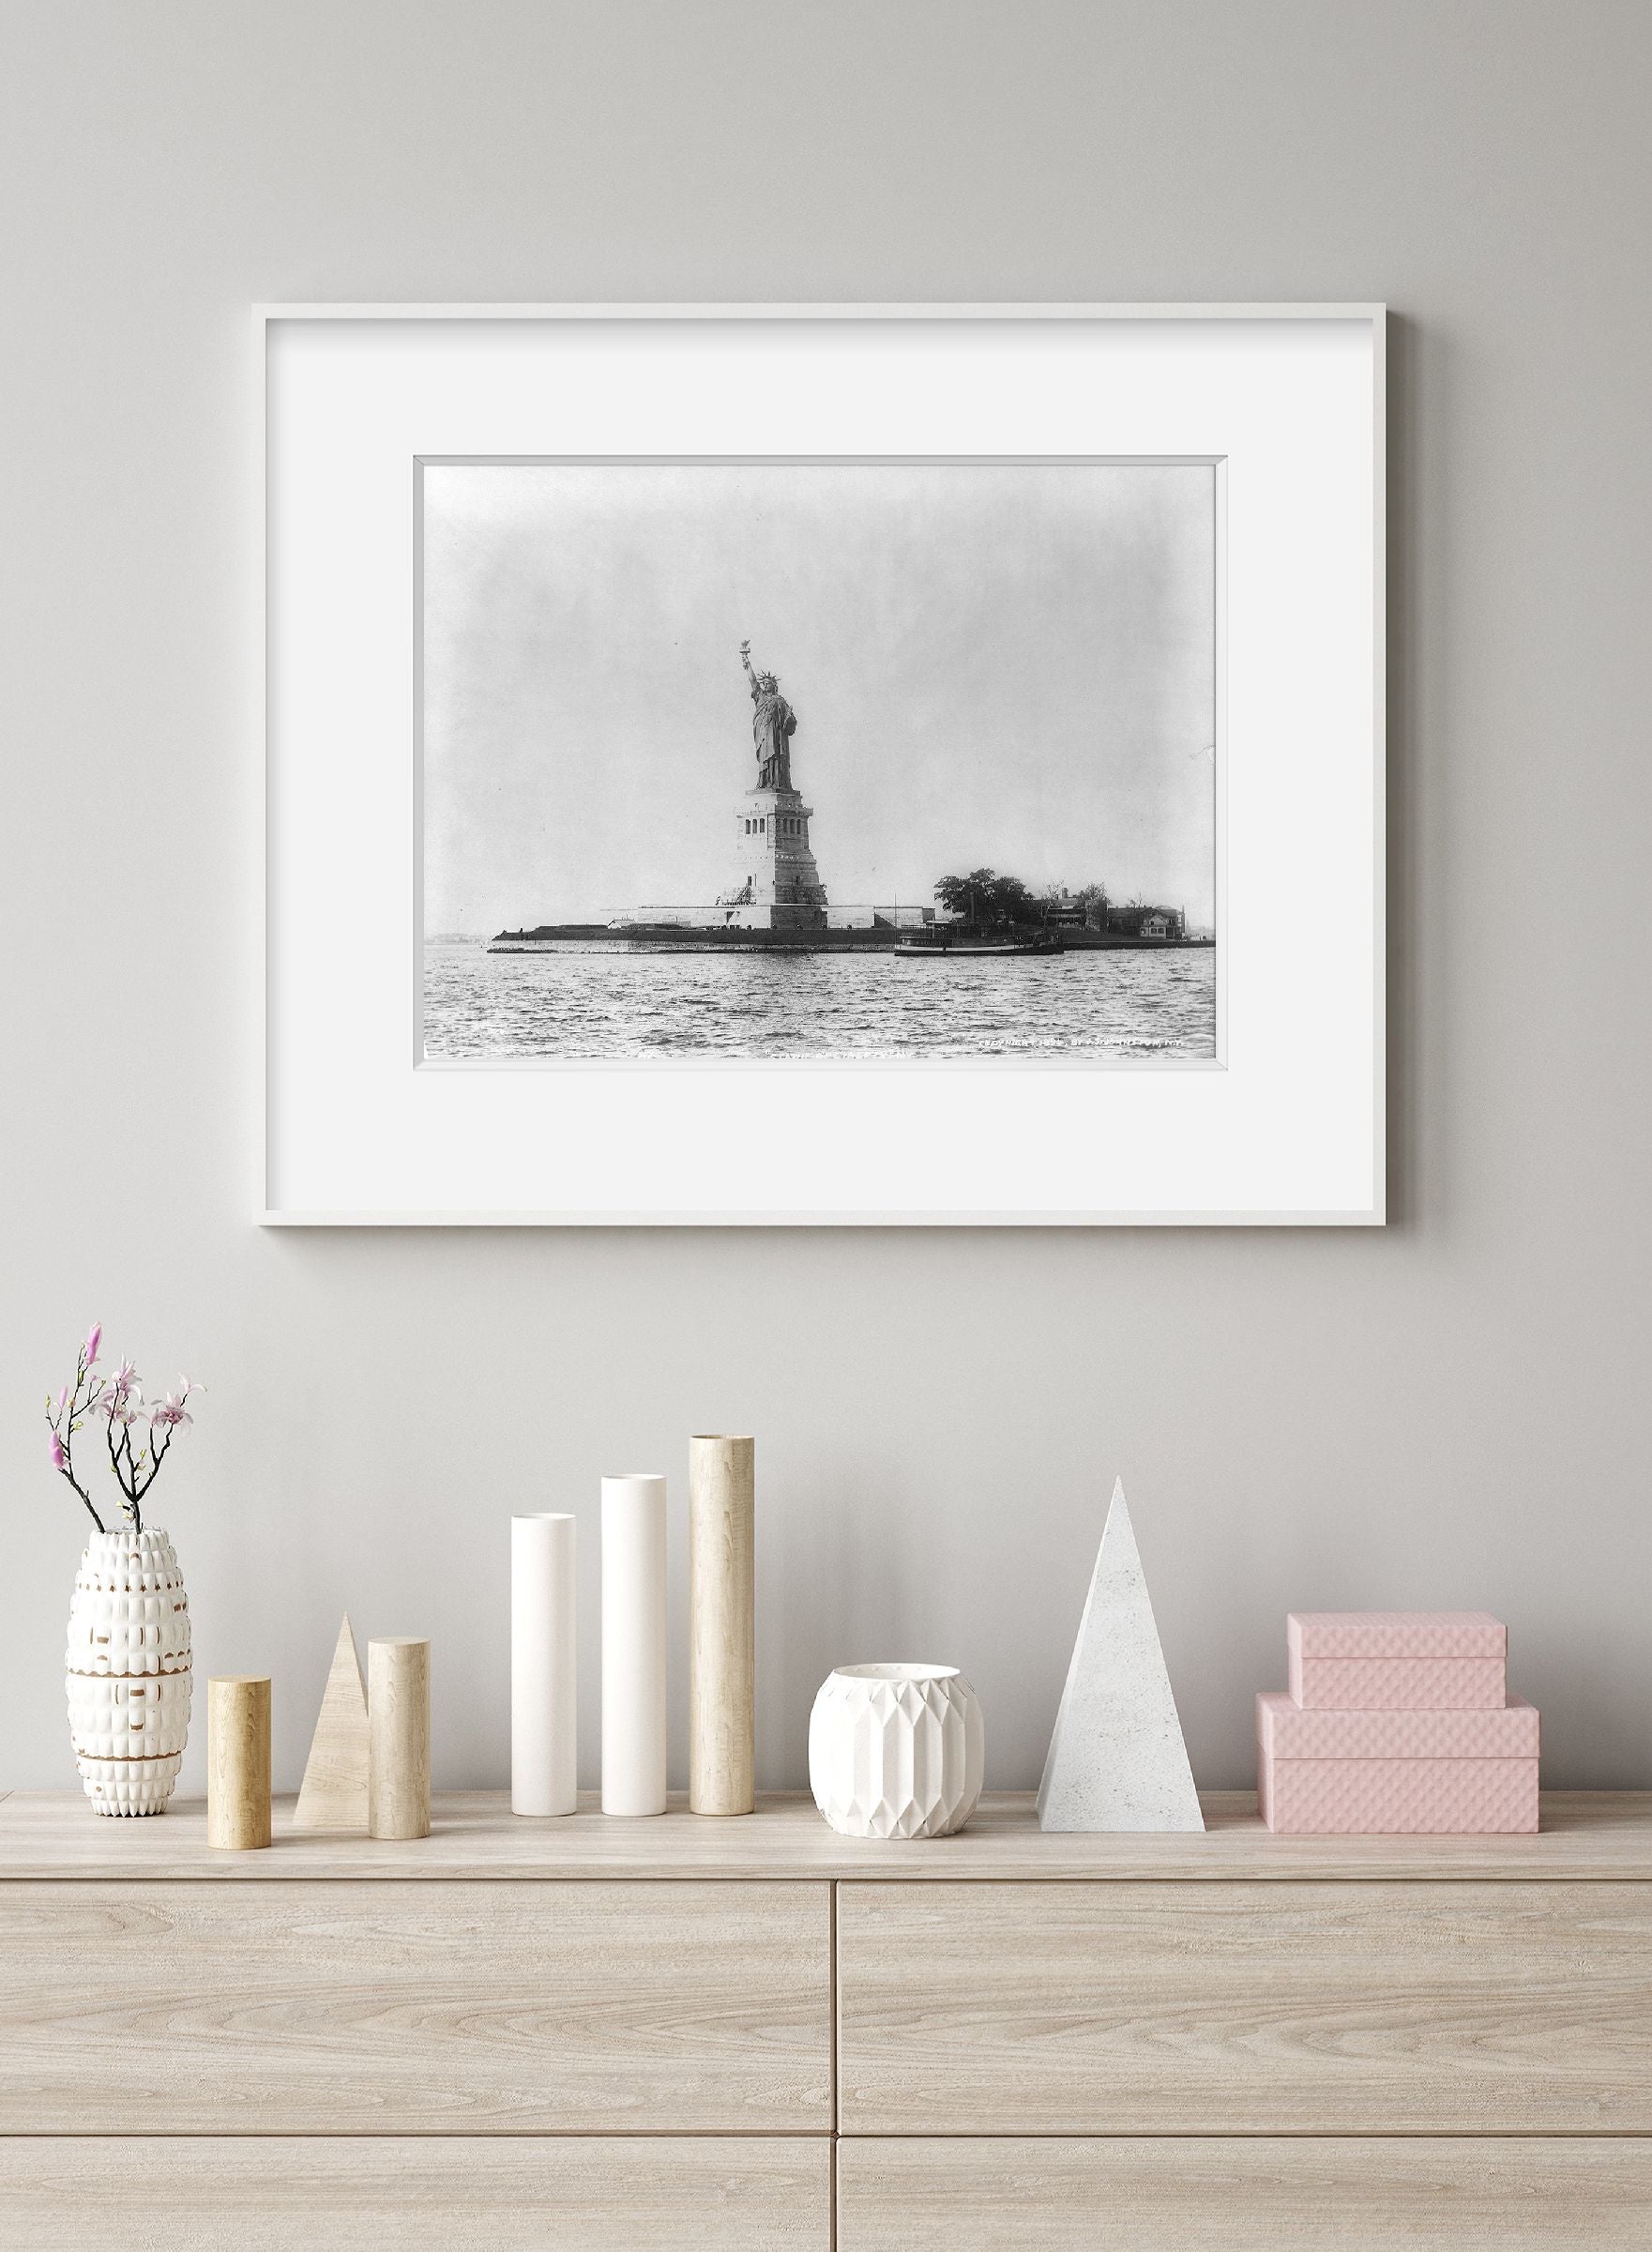 c1894 photograph of Statue of Liberty, N.Y. / J.S. Johnston, view & marine pho